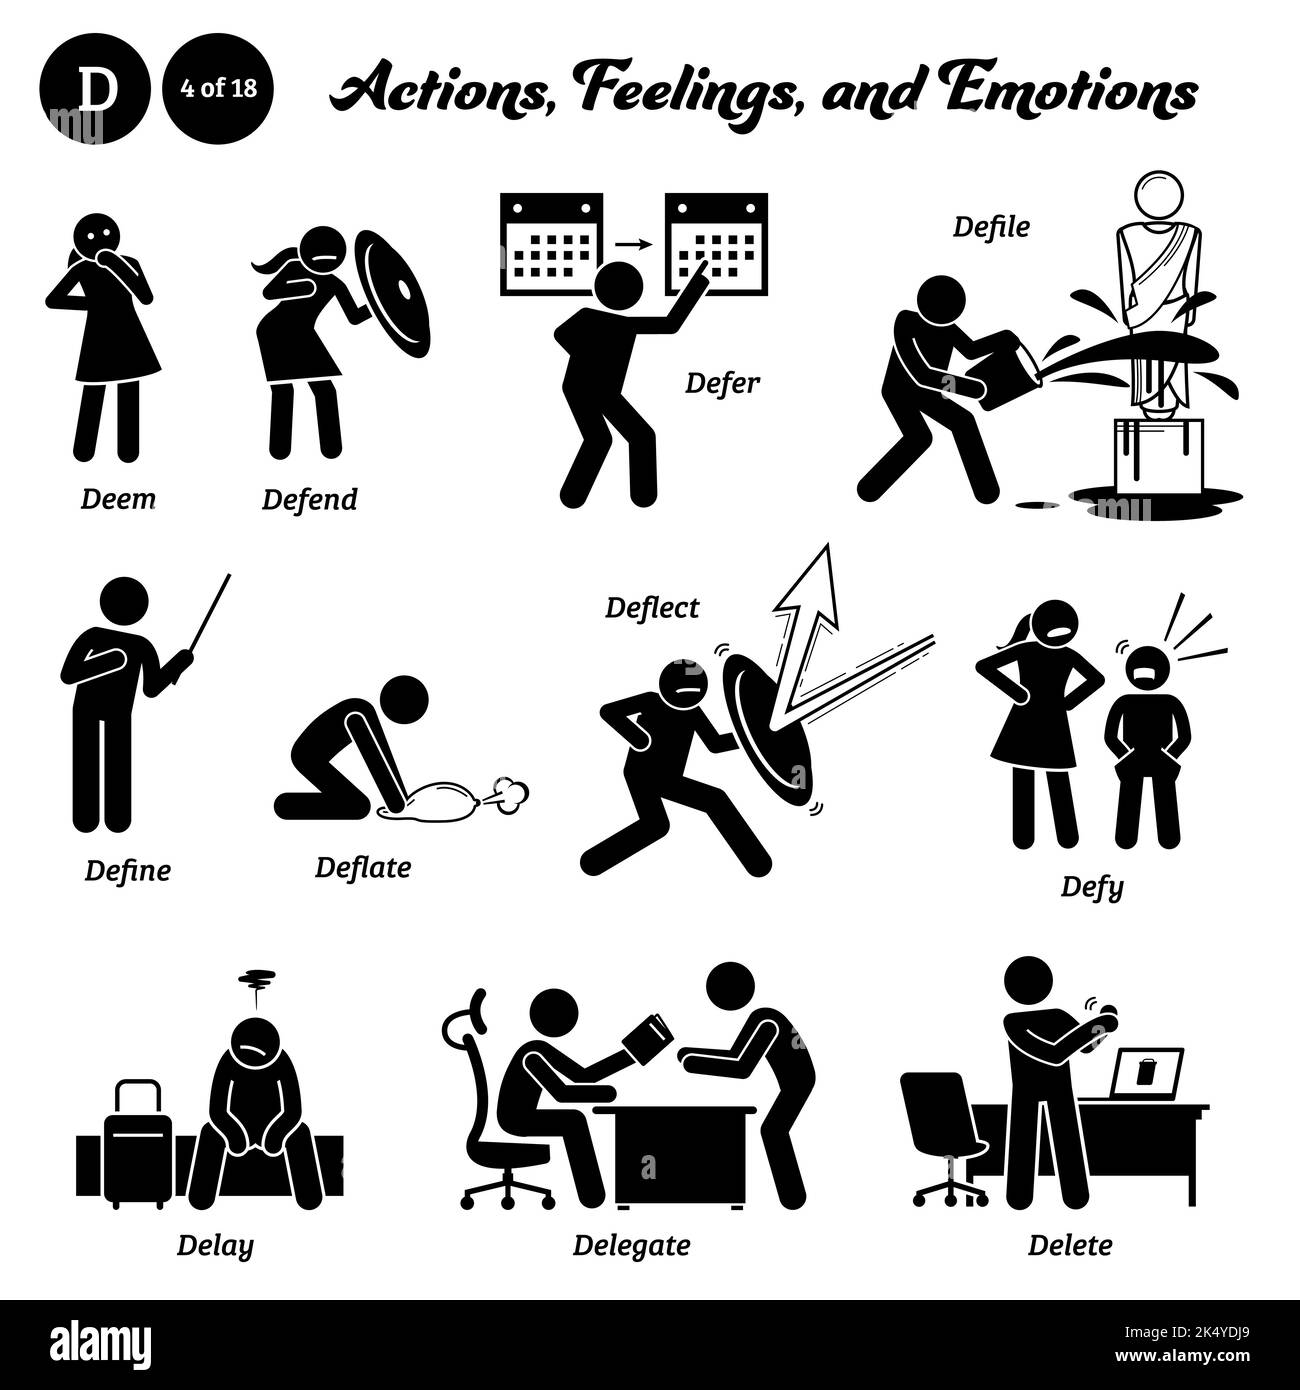 Stick figure human people man action, feelings, and emotions icons alphabet D. Deem, defend, defer, defile, define, deflate, deflect, defy, delay, del Stock Vector